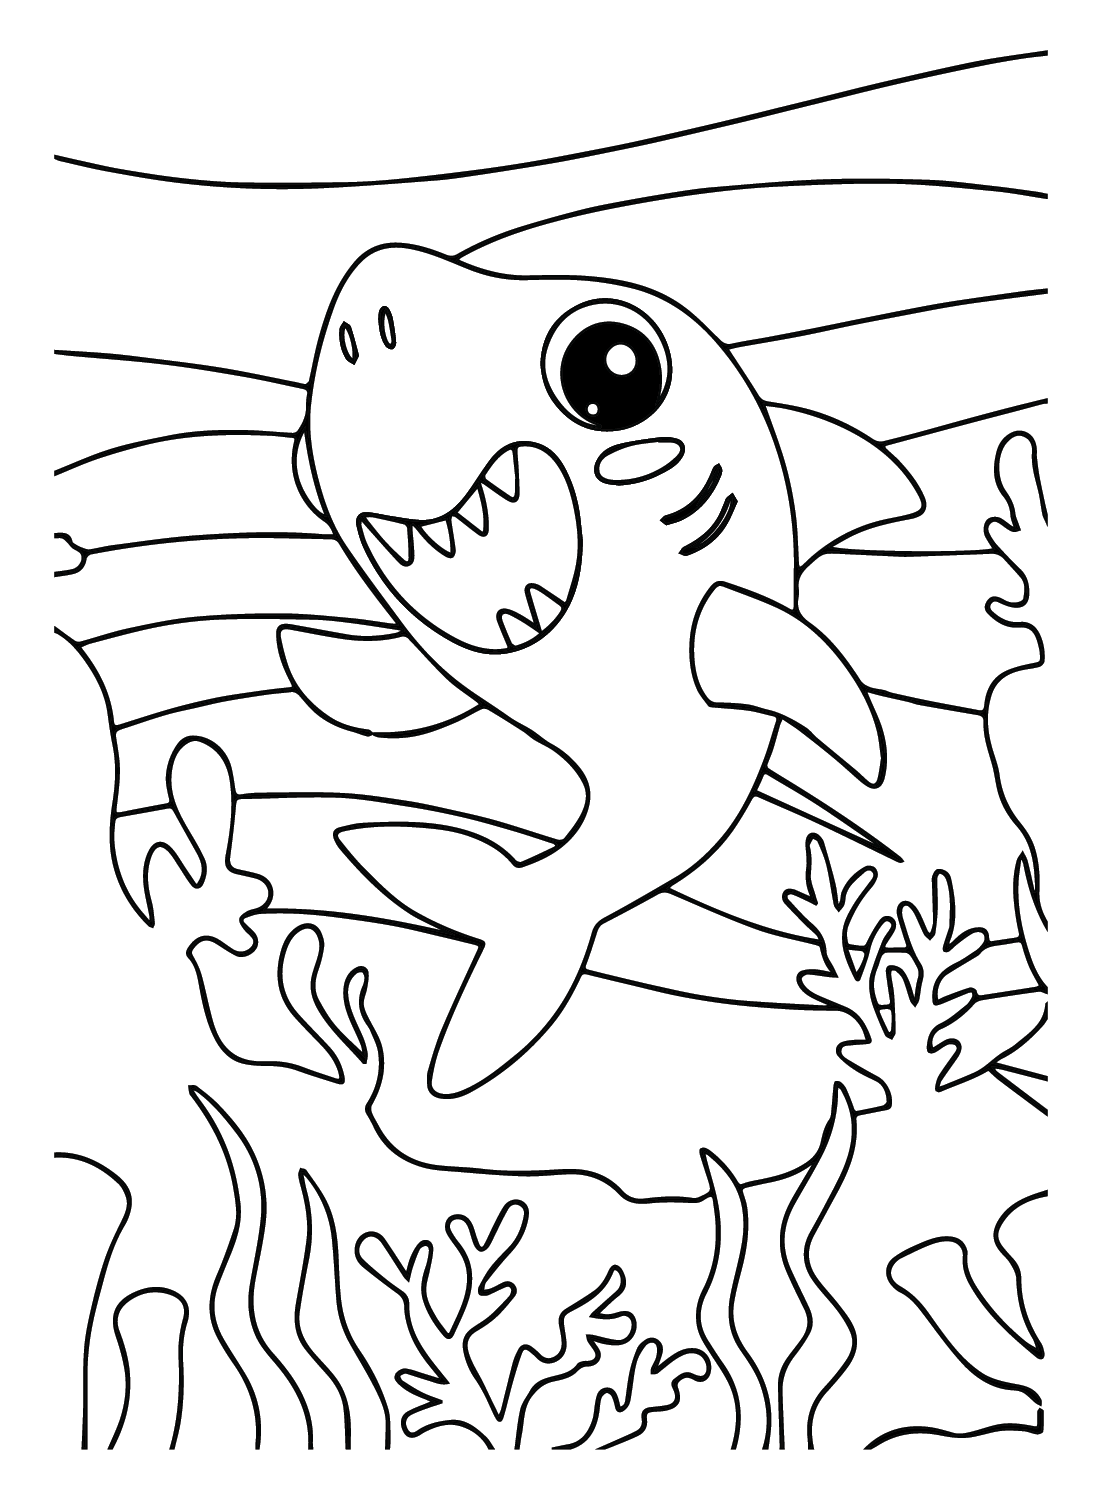 Baby Great White Shark Coloring Page - Free Printable Coloring Pages